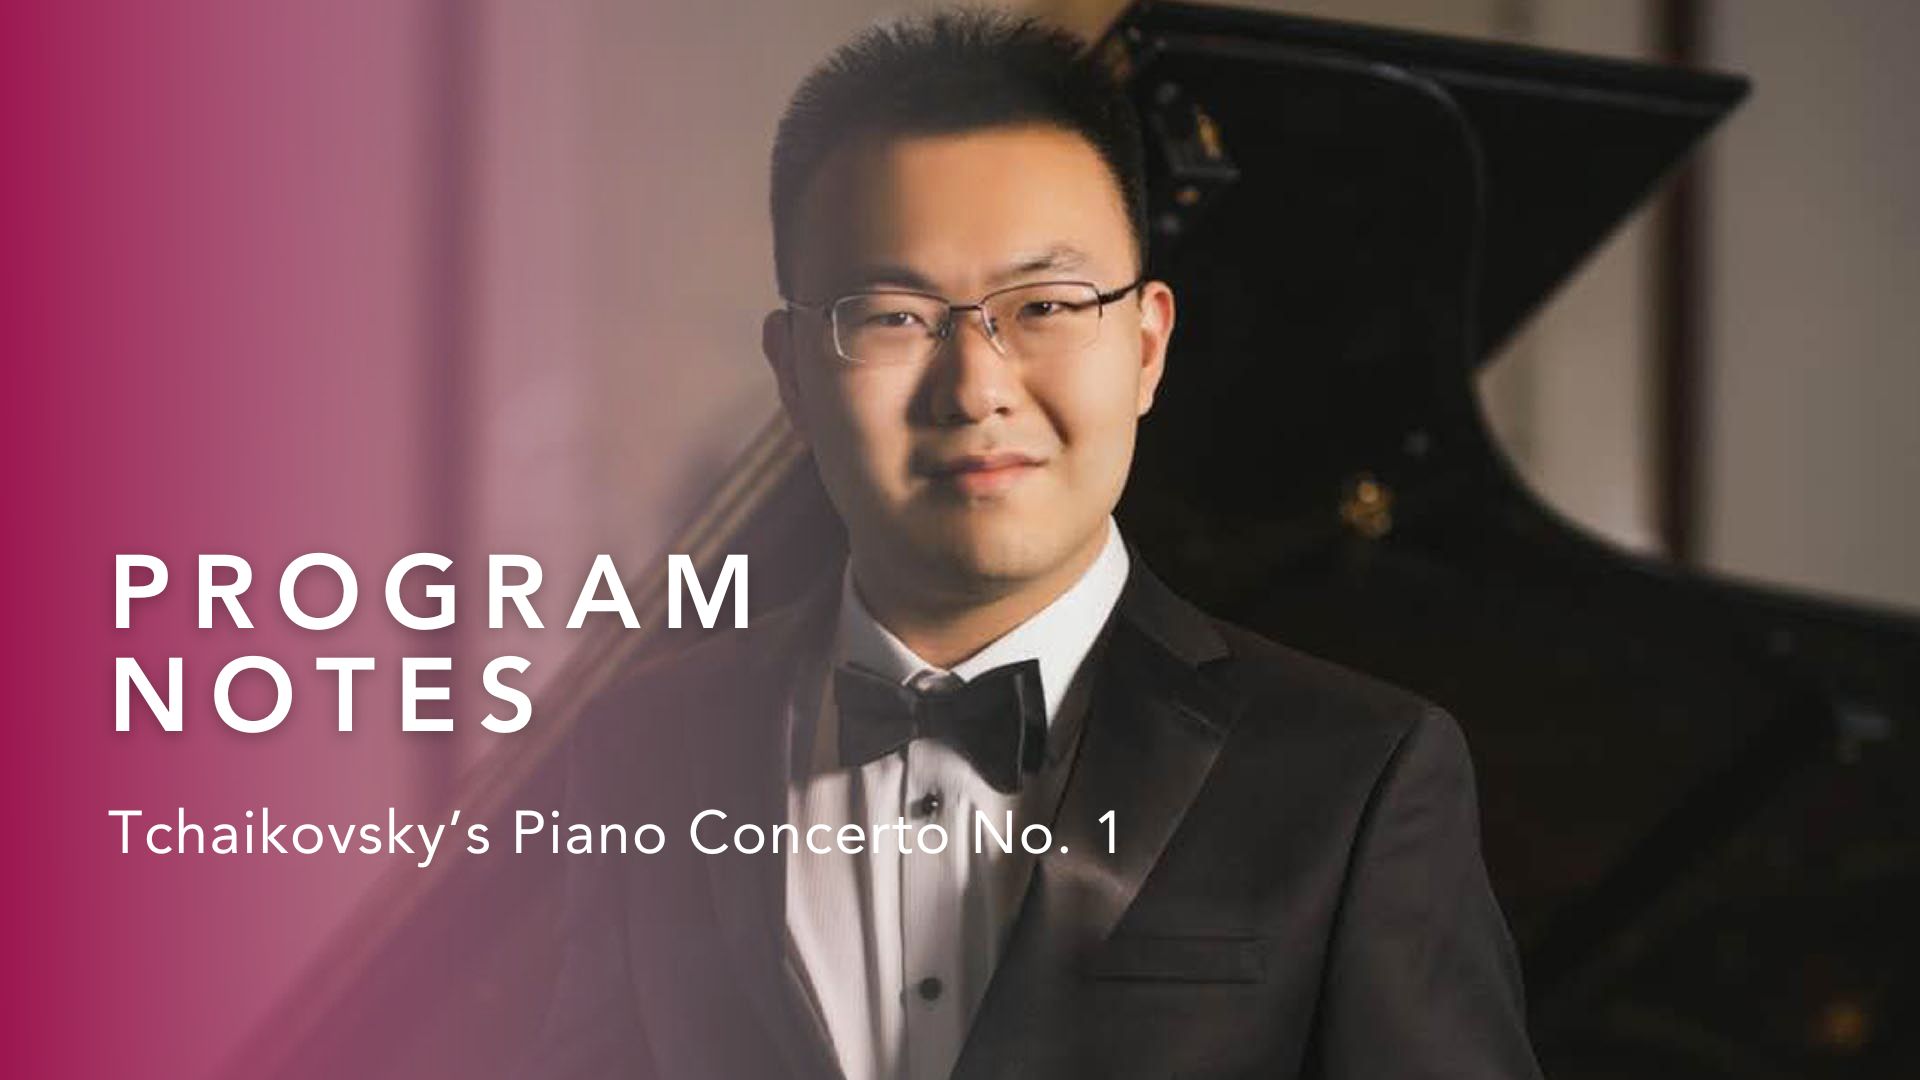 Featured image for “Program Notes: Tchaikovsky’s Piano Concerto No. 1”